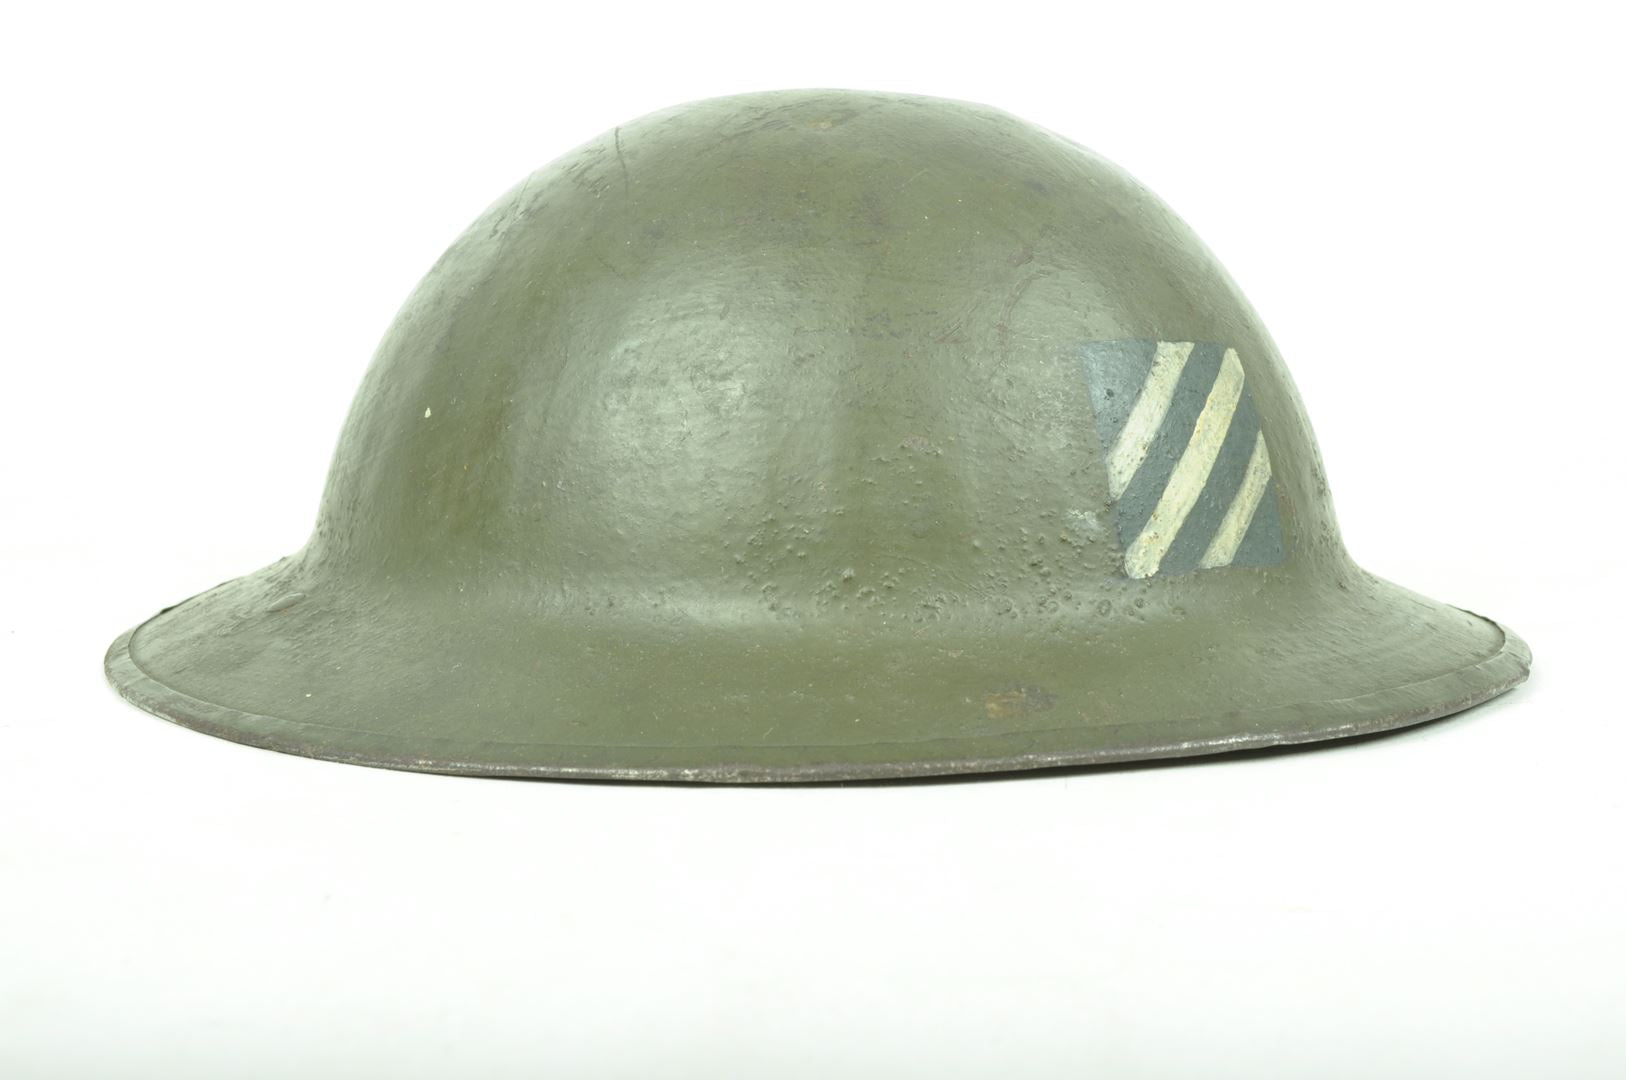 Casque US 17 / 3rd infantry division